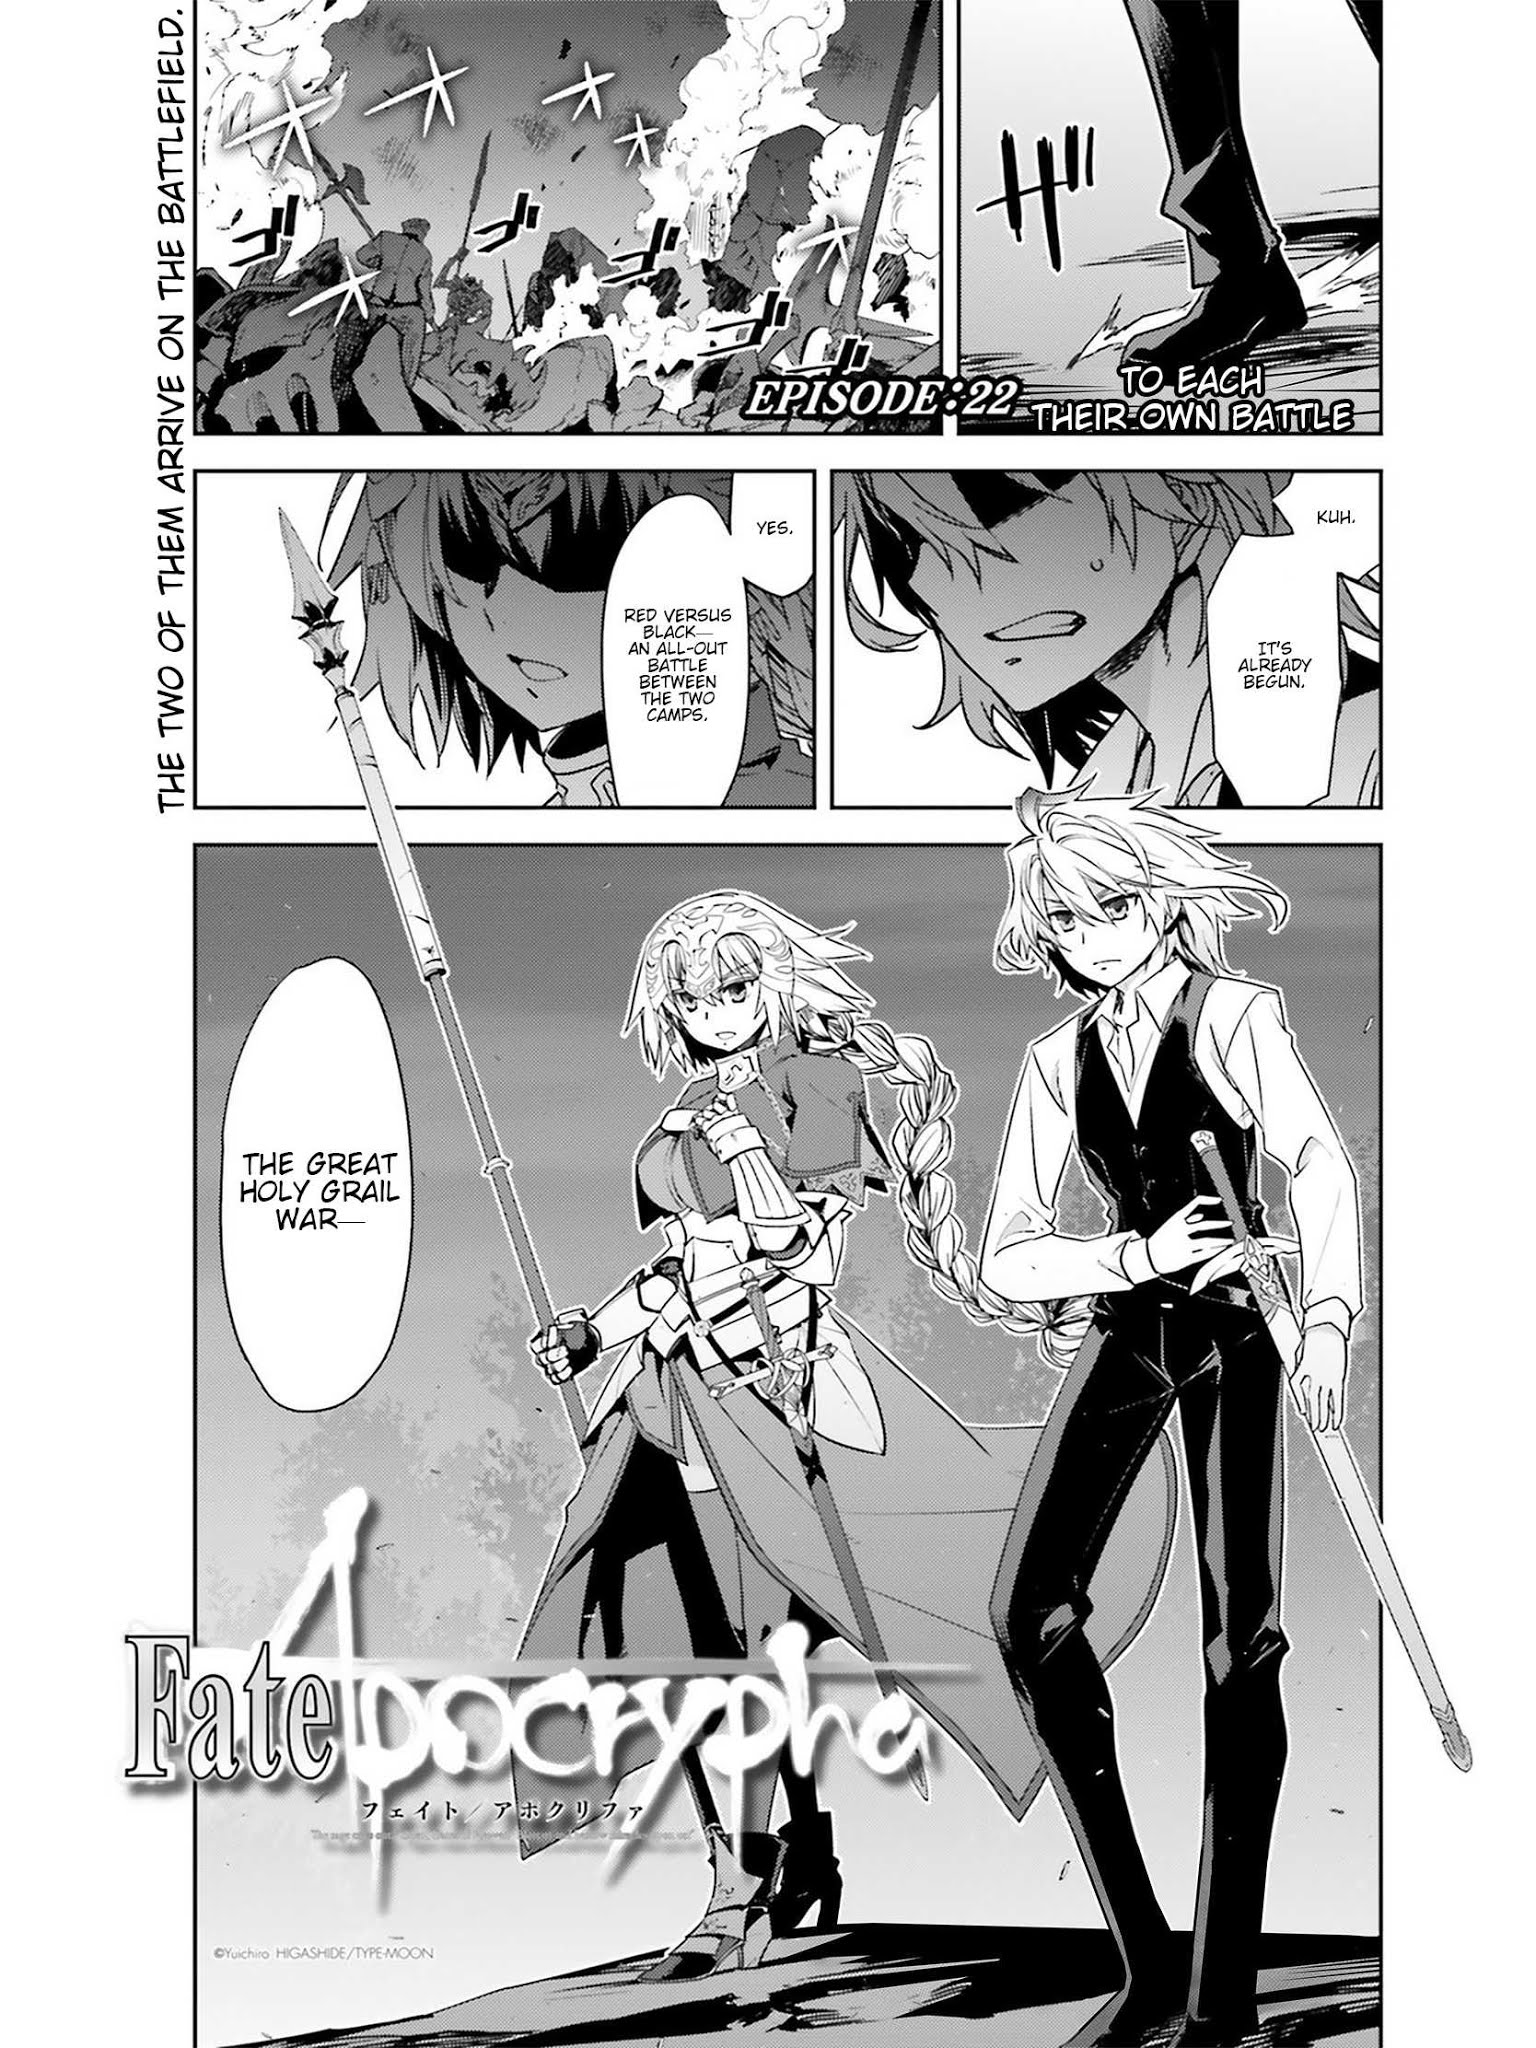 Fate/apocrypha Chapter 22: Episode: 22 To Each Their Own Battle - Picture 1